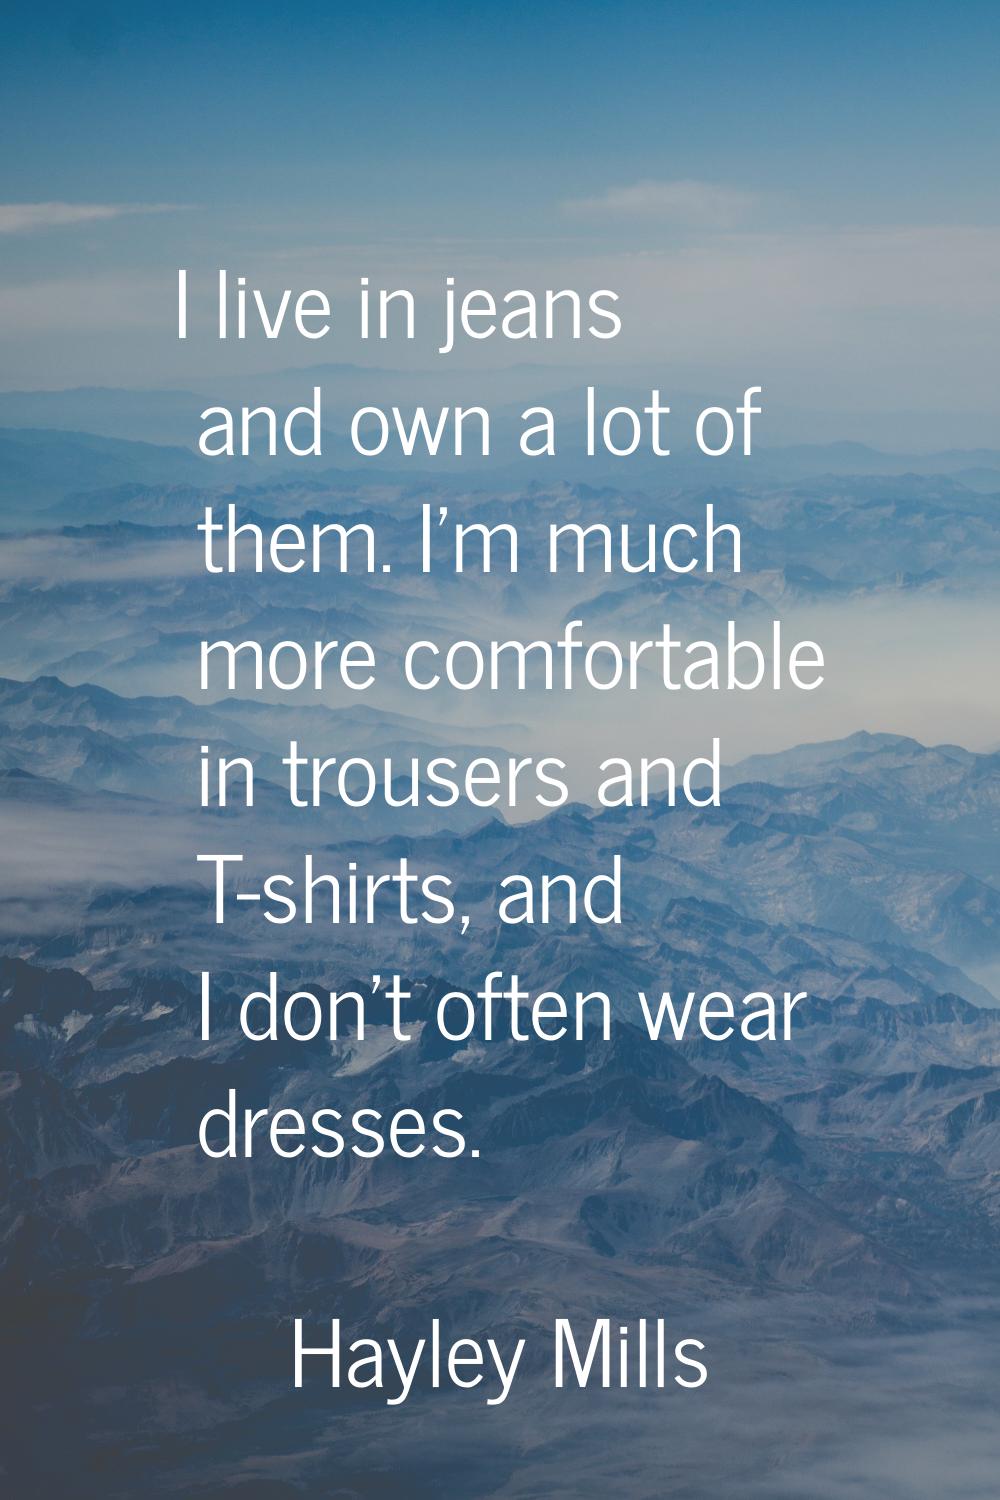 I live in jeans and own a lot of them. I'm much more comfortable in trousers and T-shirts, and I do